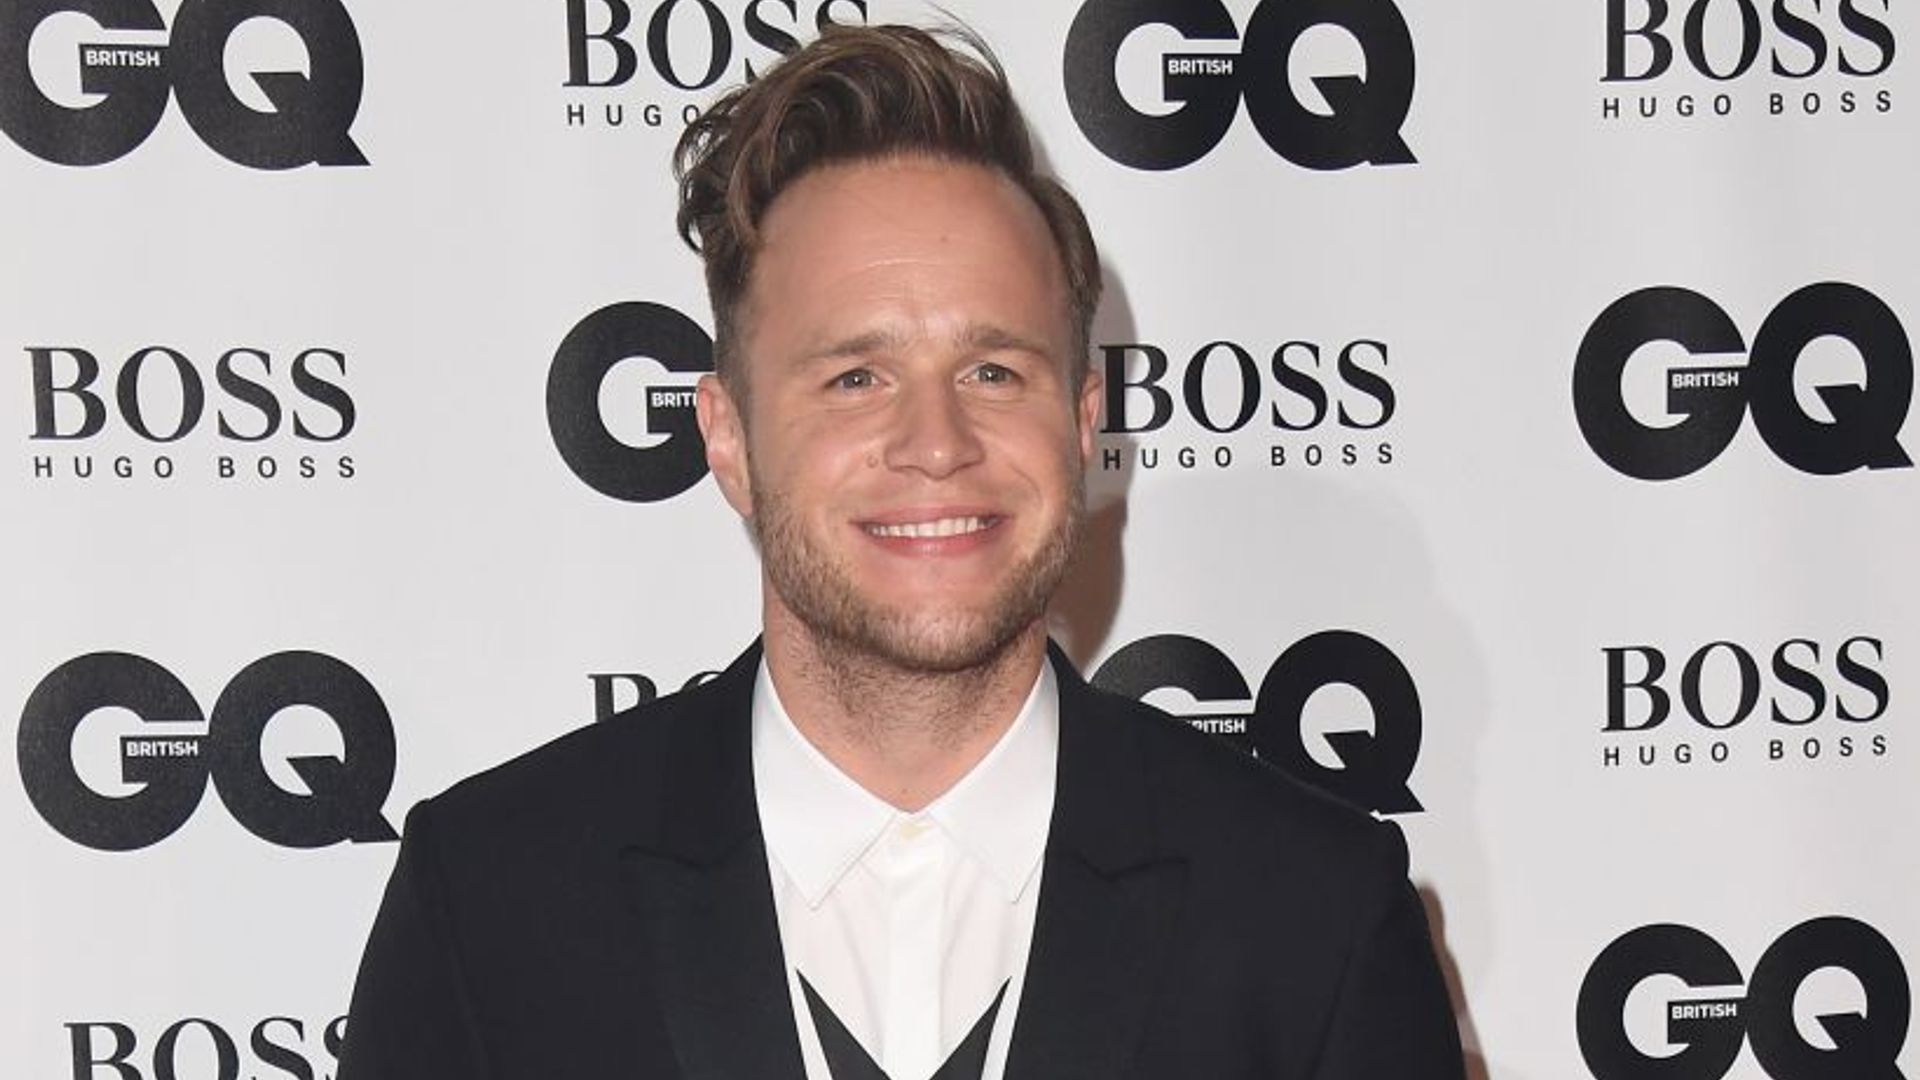 Olly Murs man of the year awards red carpet